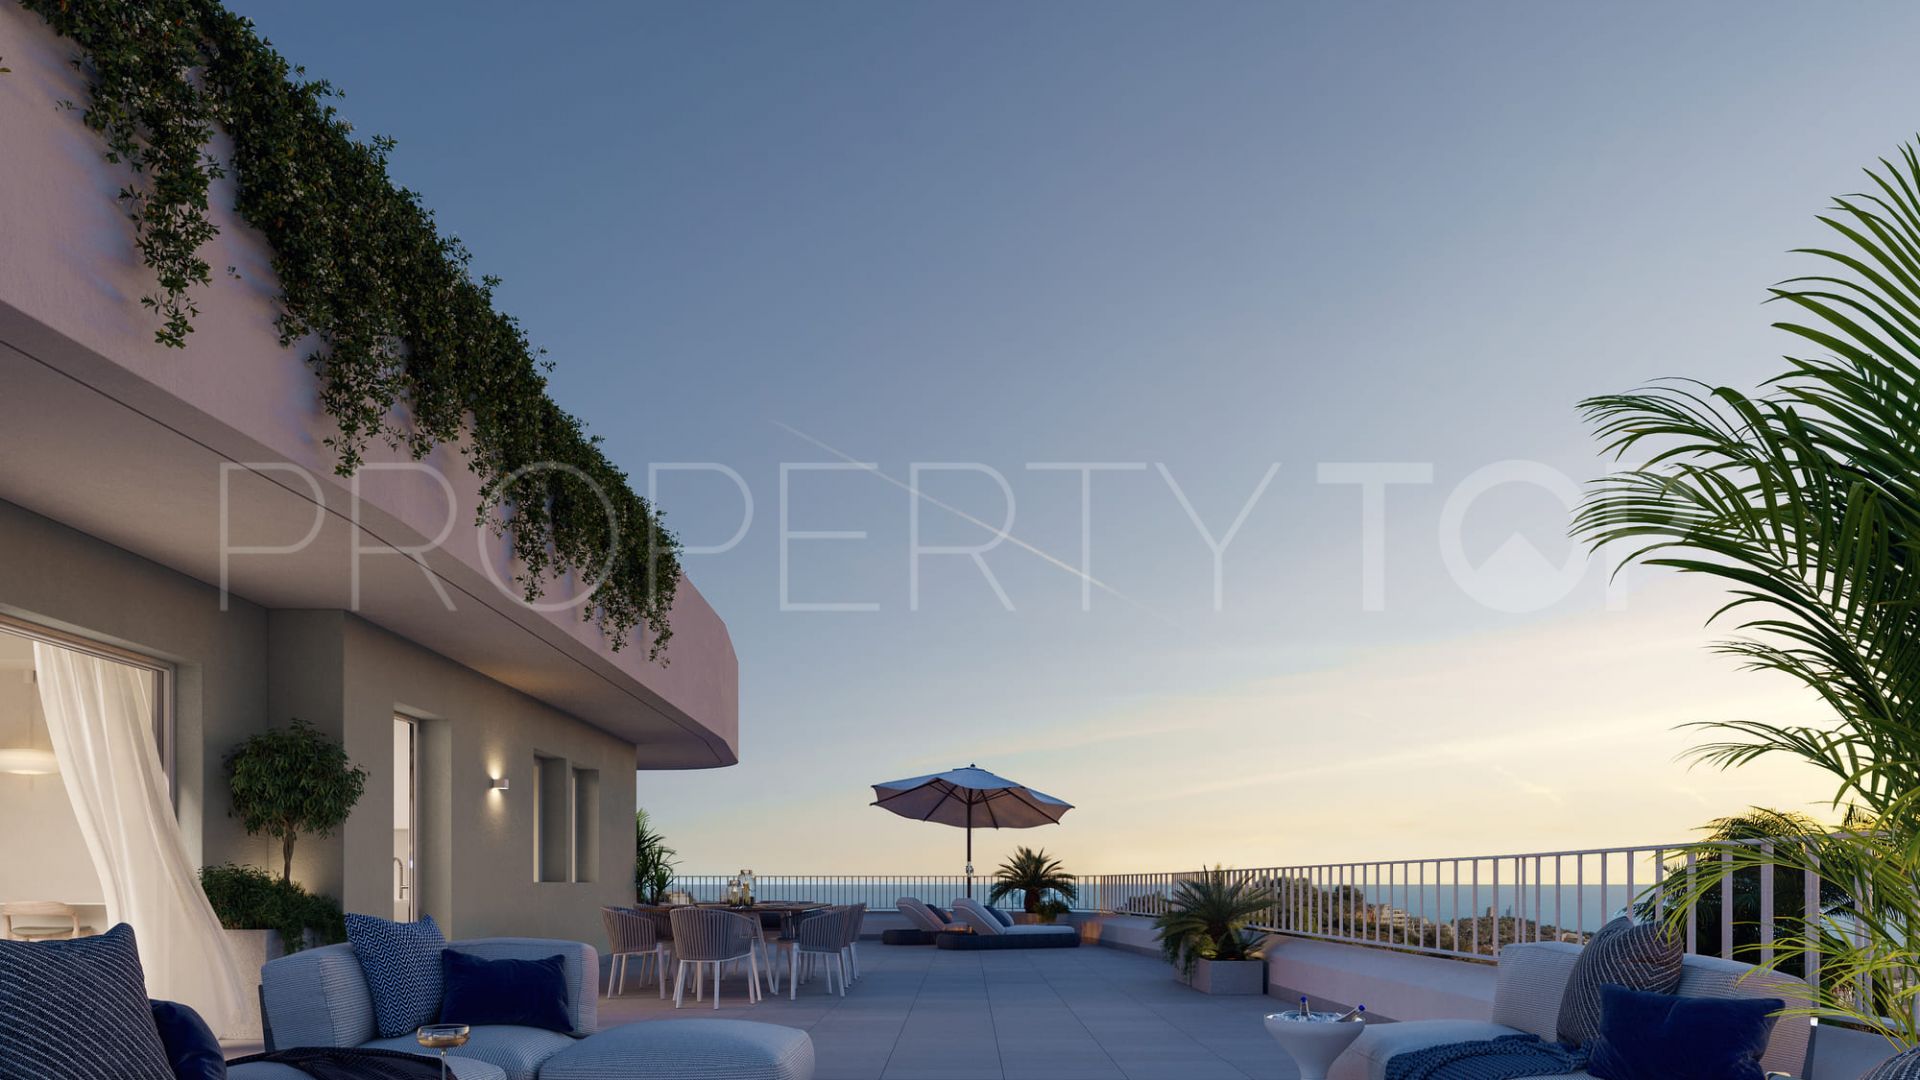 Los Pacos 2 bedrooms penthouse for sale